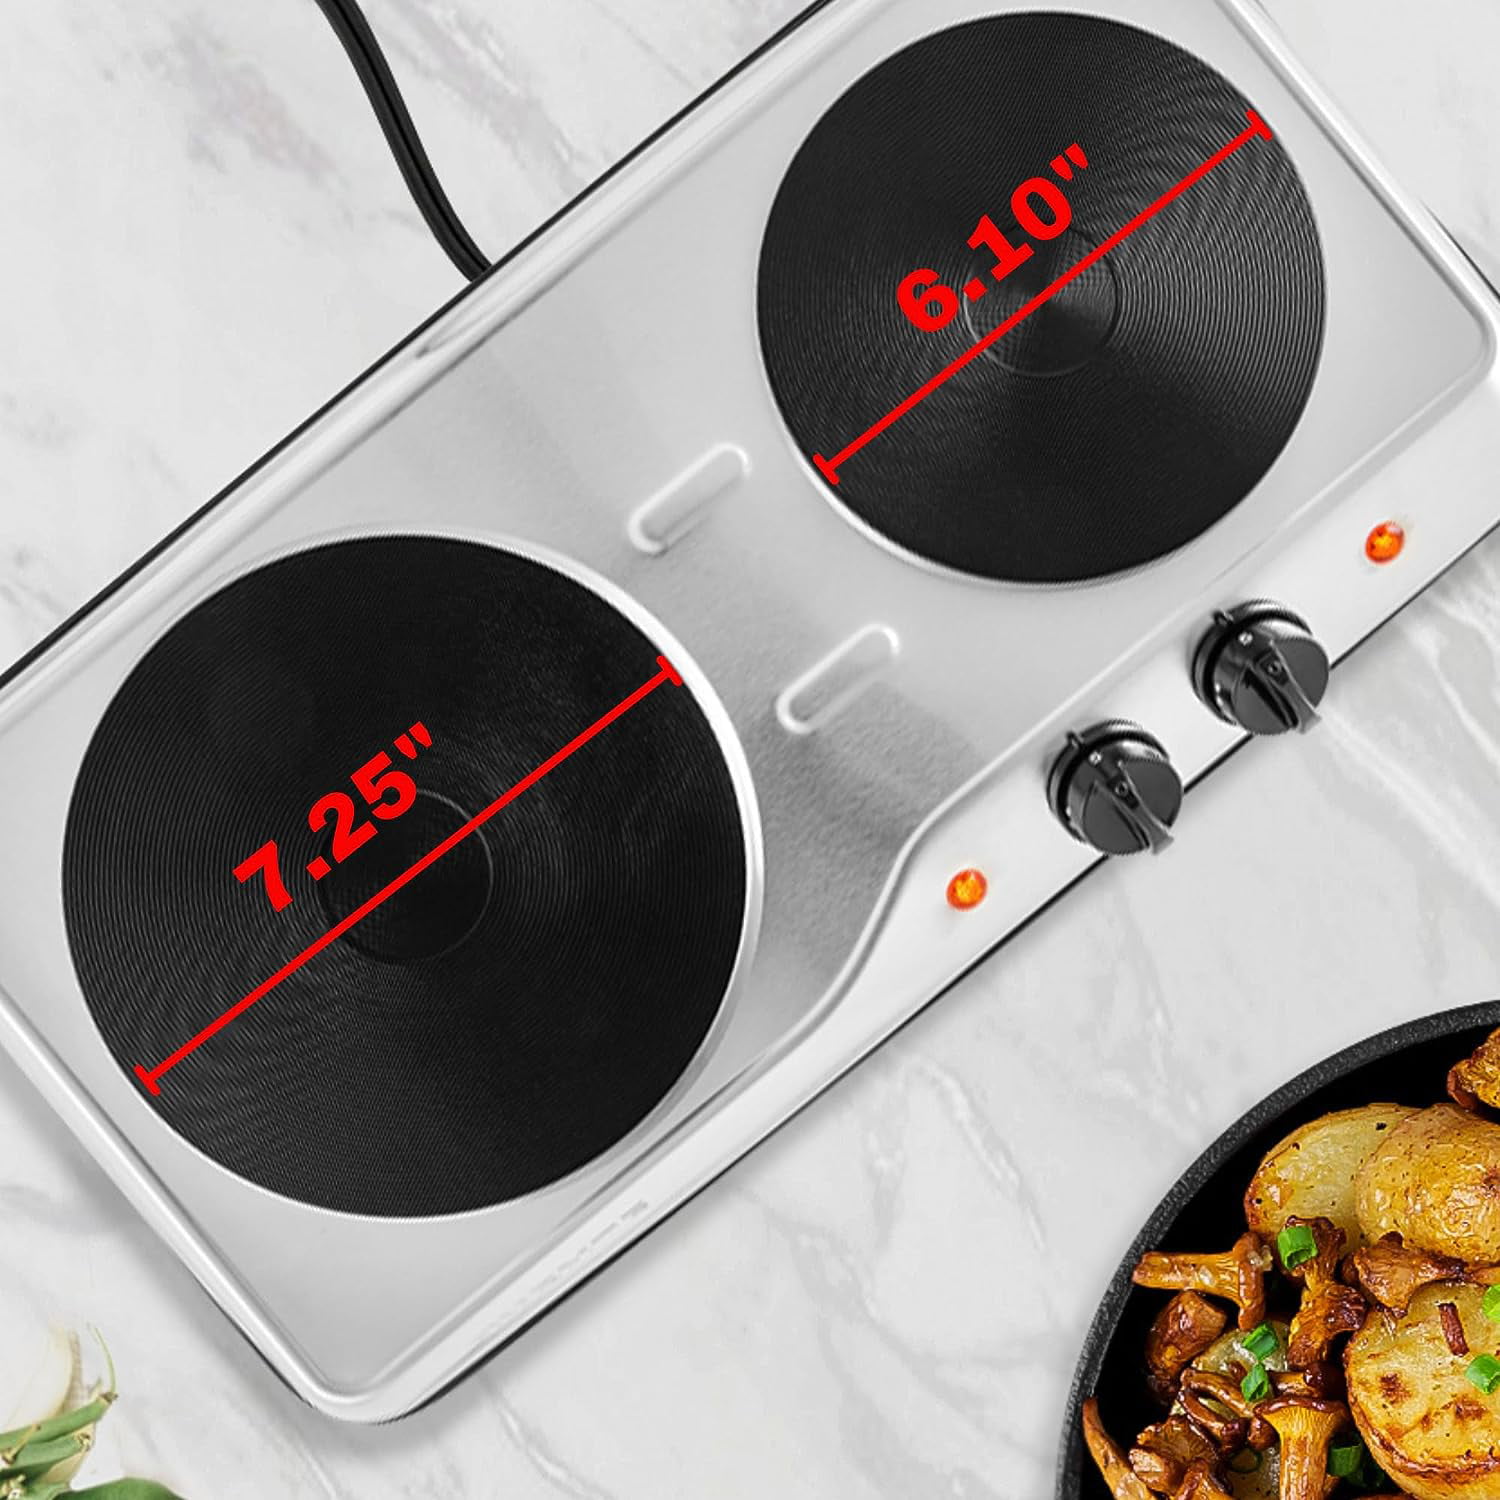 OVENTE Electric Countertop Double Burner, 1700W Cooktop with 7.25